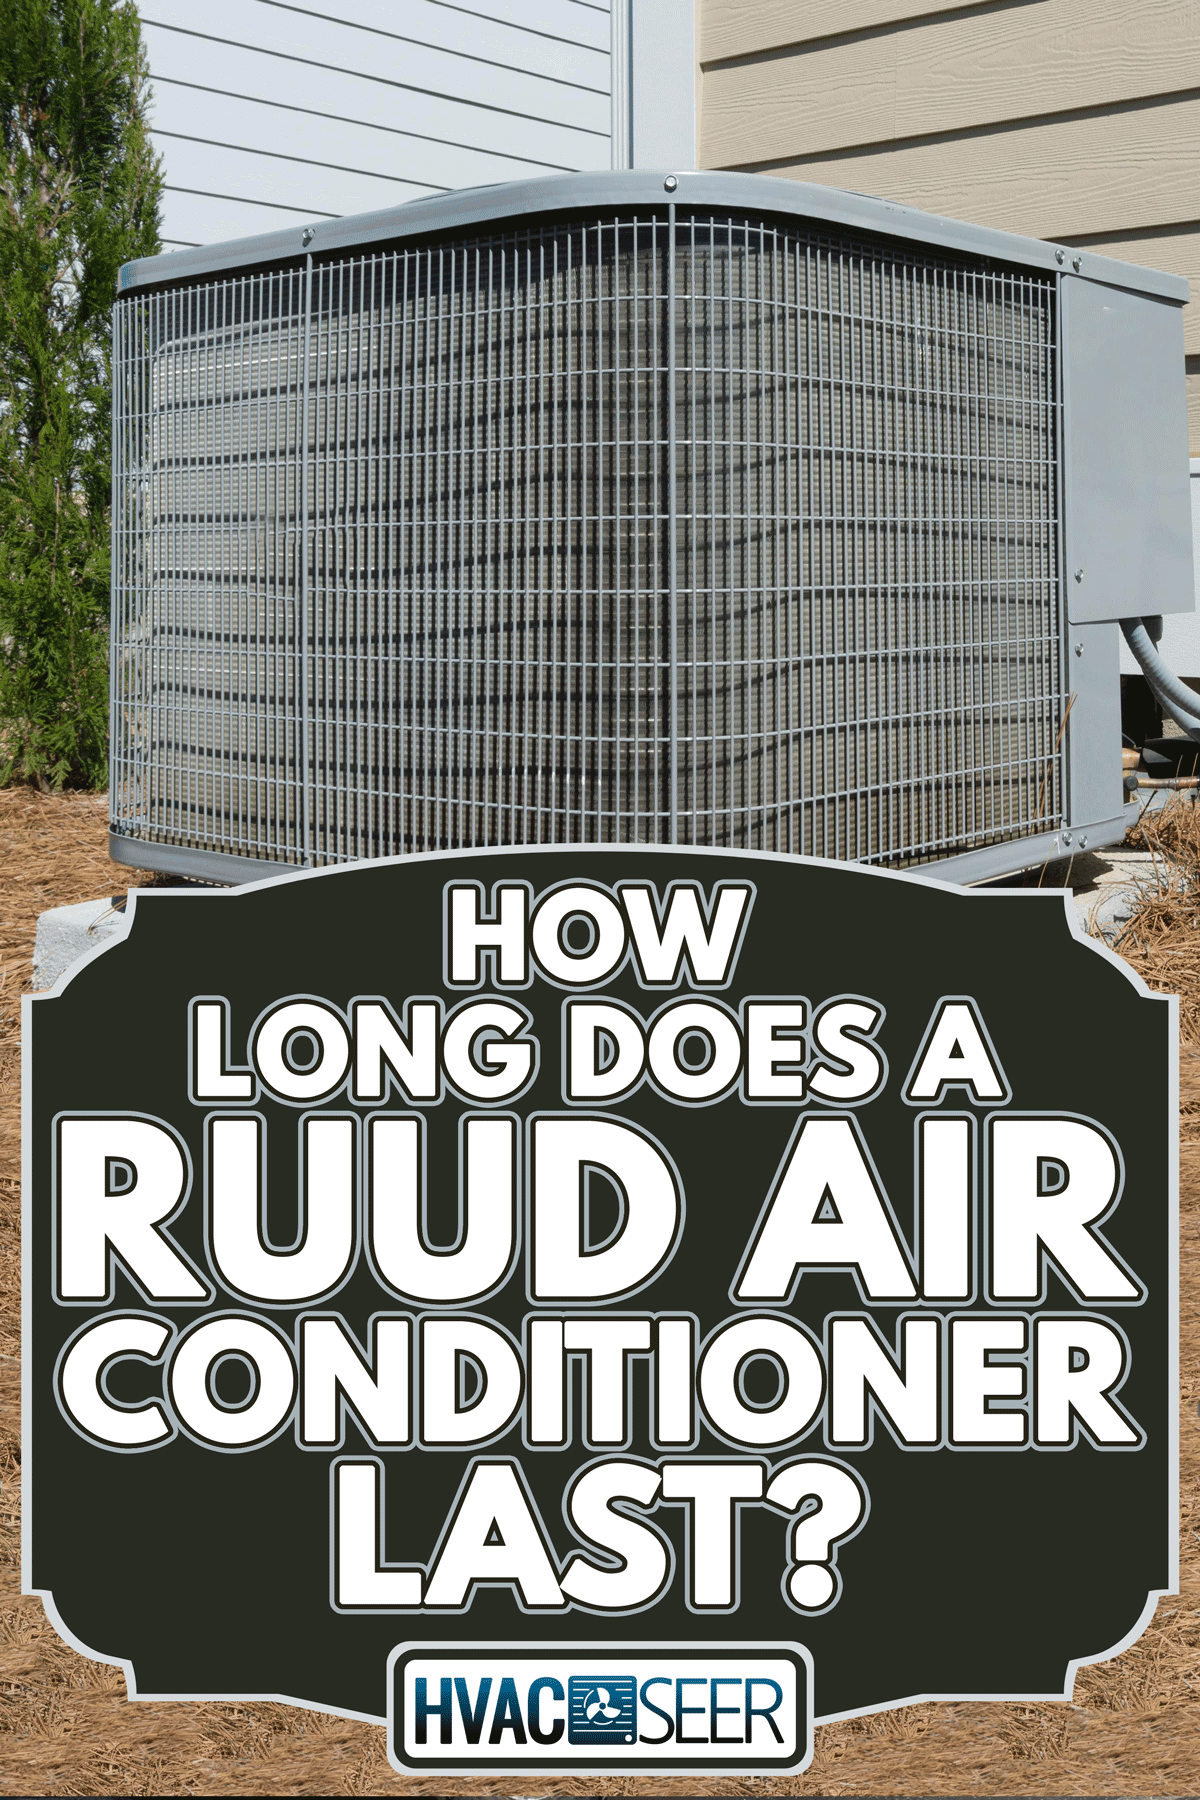 Air conditioner unit connected to the residential house, How Long Does A Ruud Air Conditioner Last?